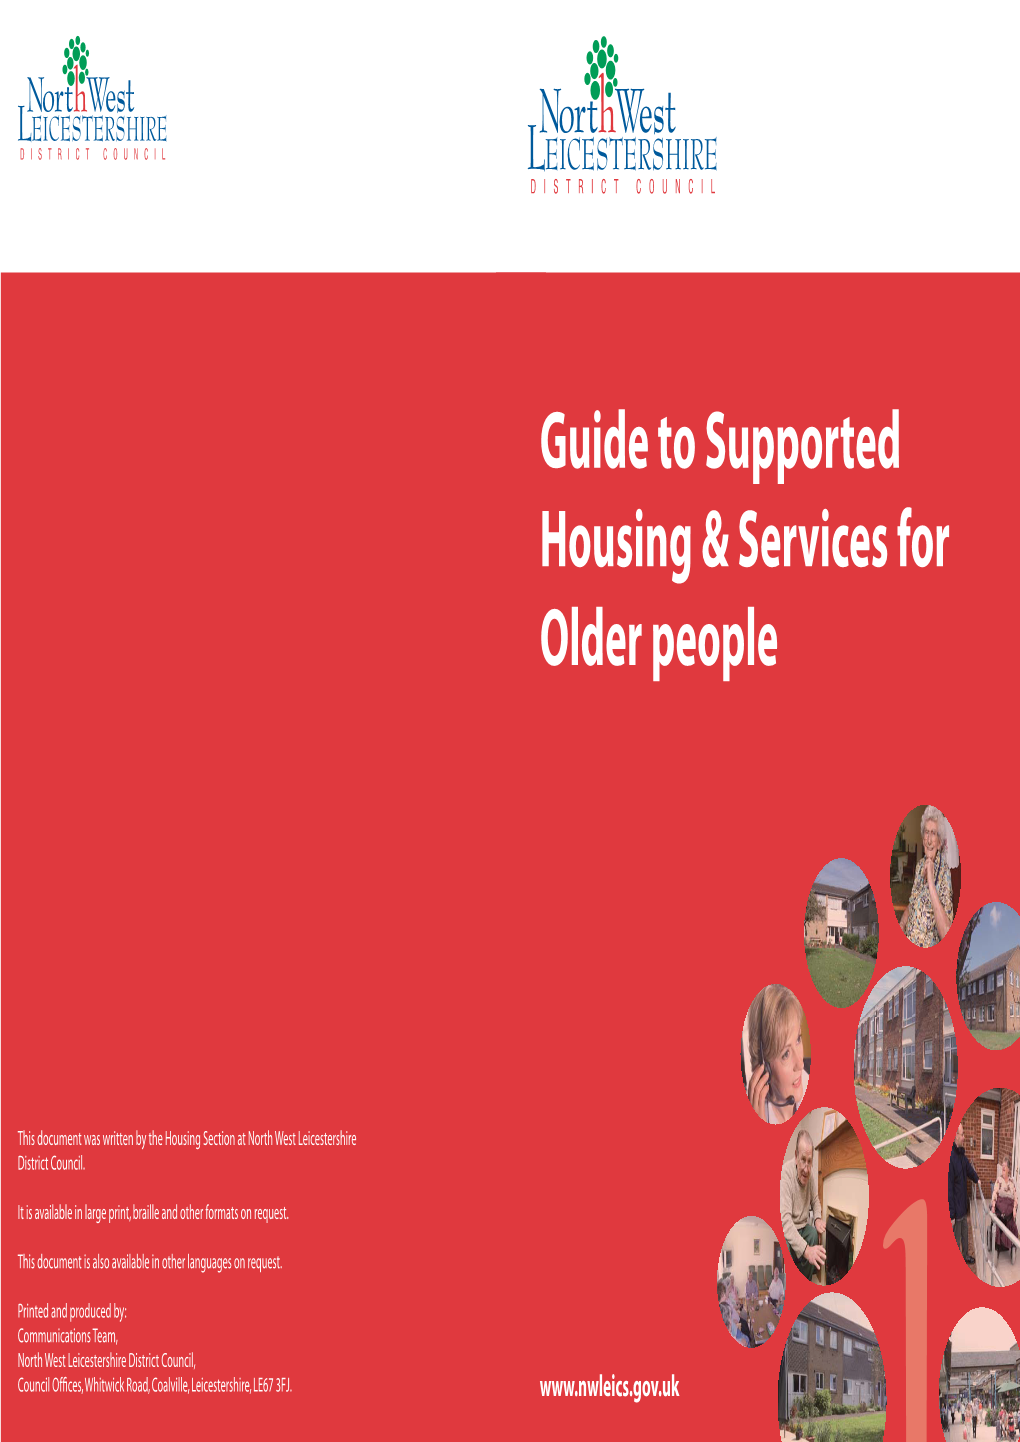 Guide to Supported Housing & Services for Older People